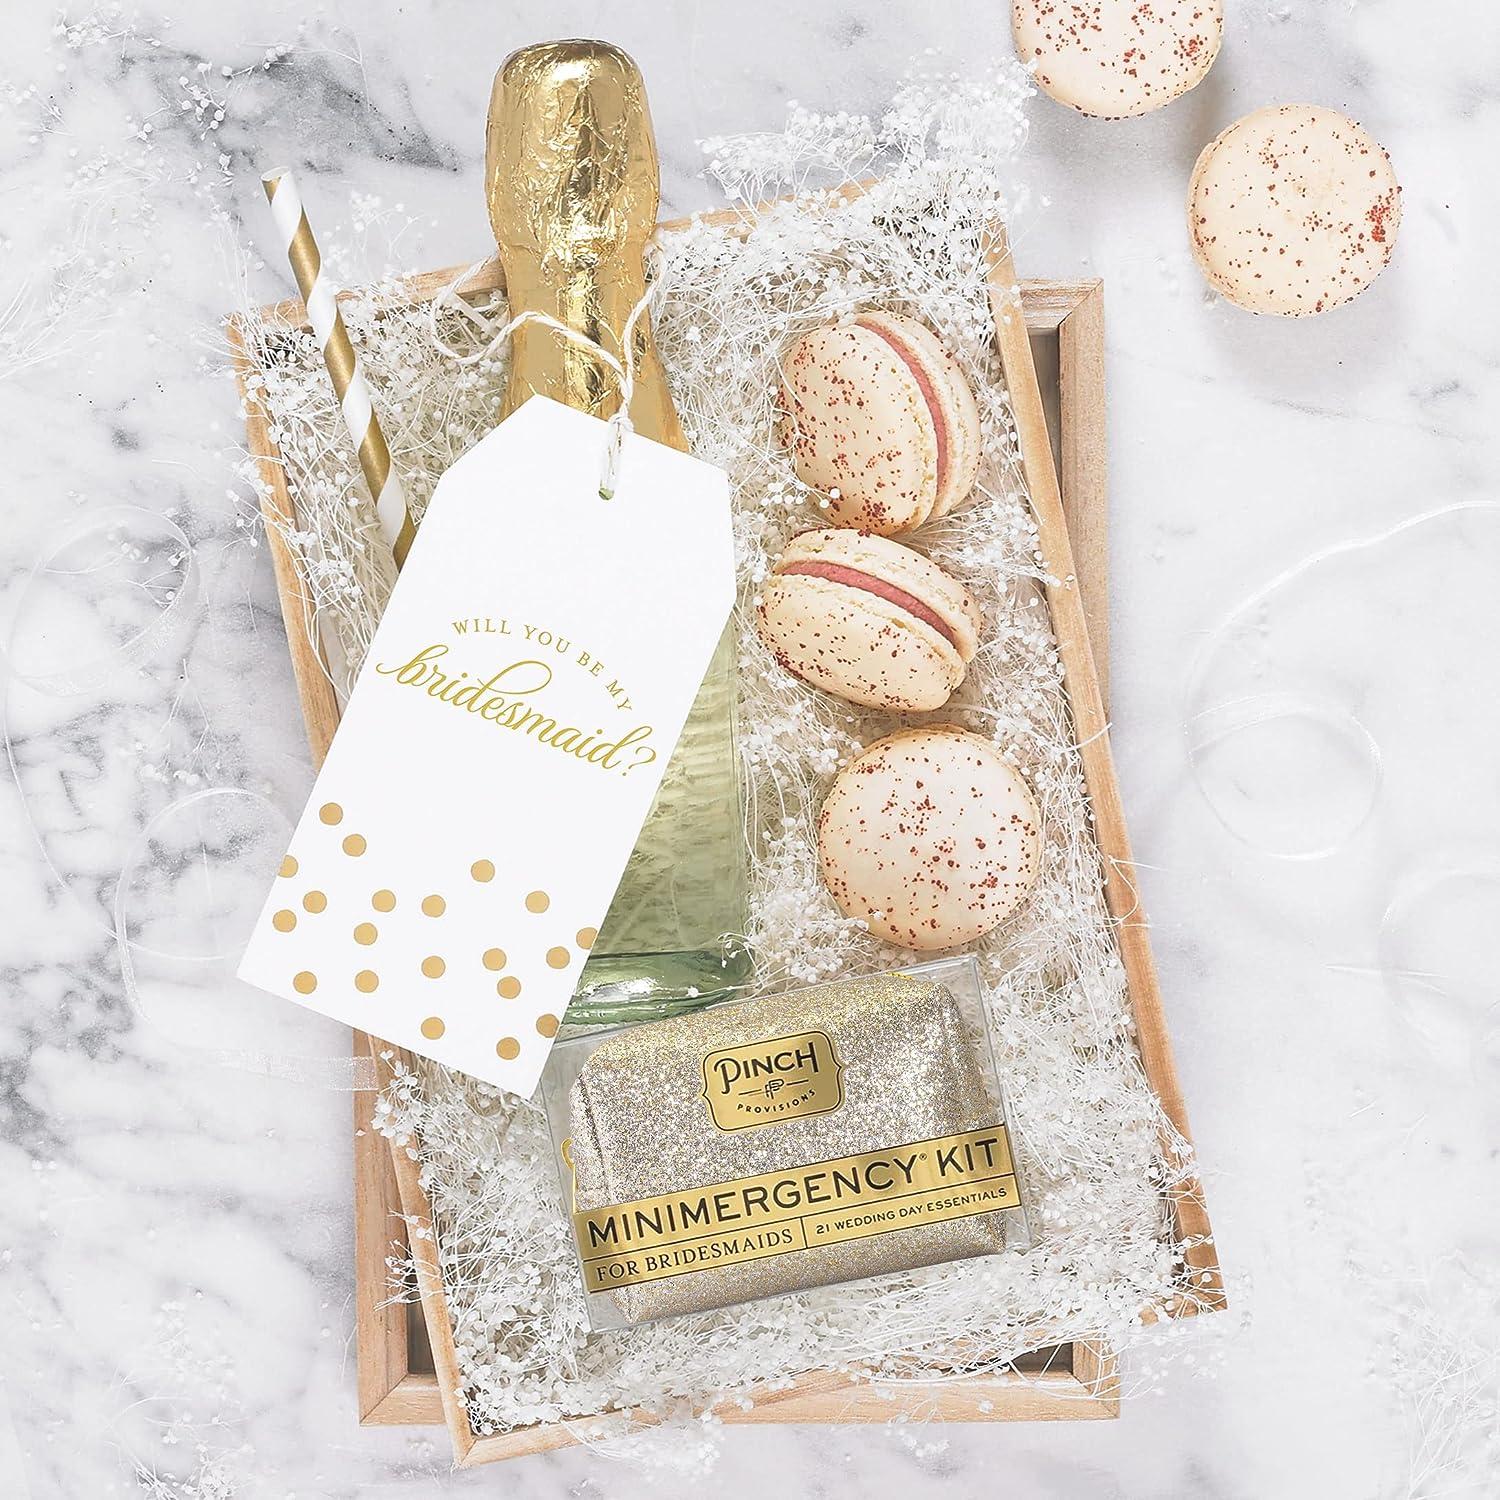 Pinch Provisions Minimergency Kit for Bridesmaids, Includes 21 Emergency  Wedding Day Must-Have Essentials, Perfect Bridal Shower and Bridesmaids